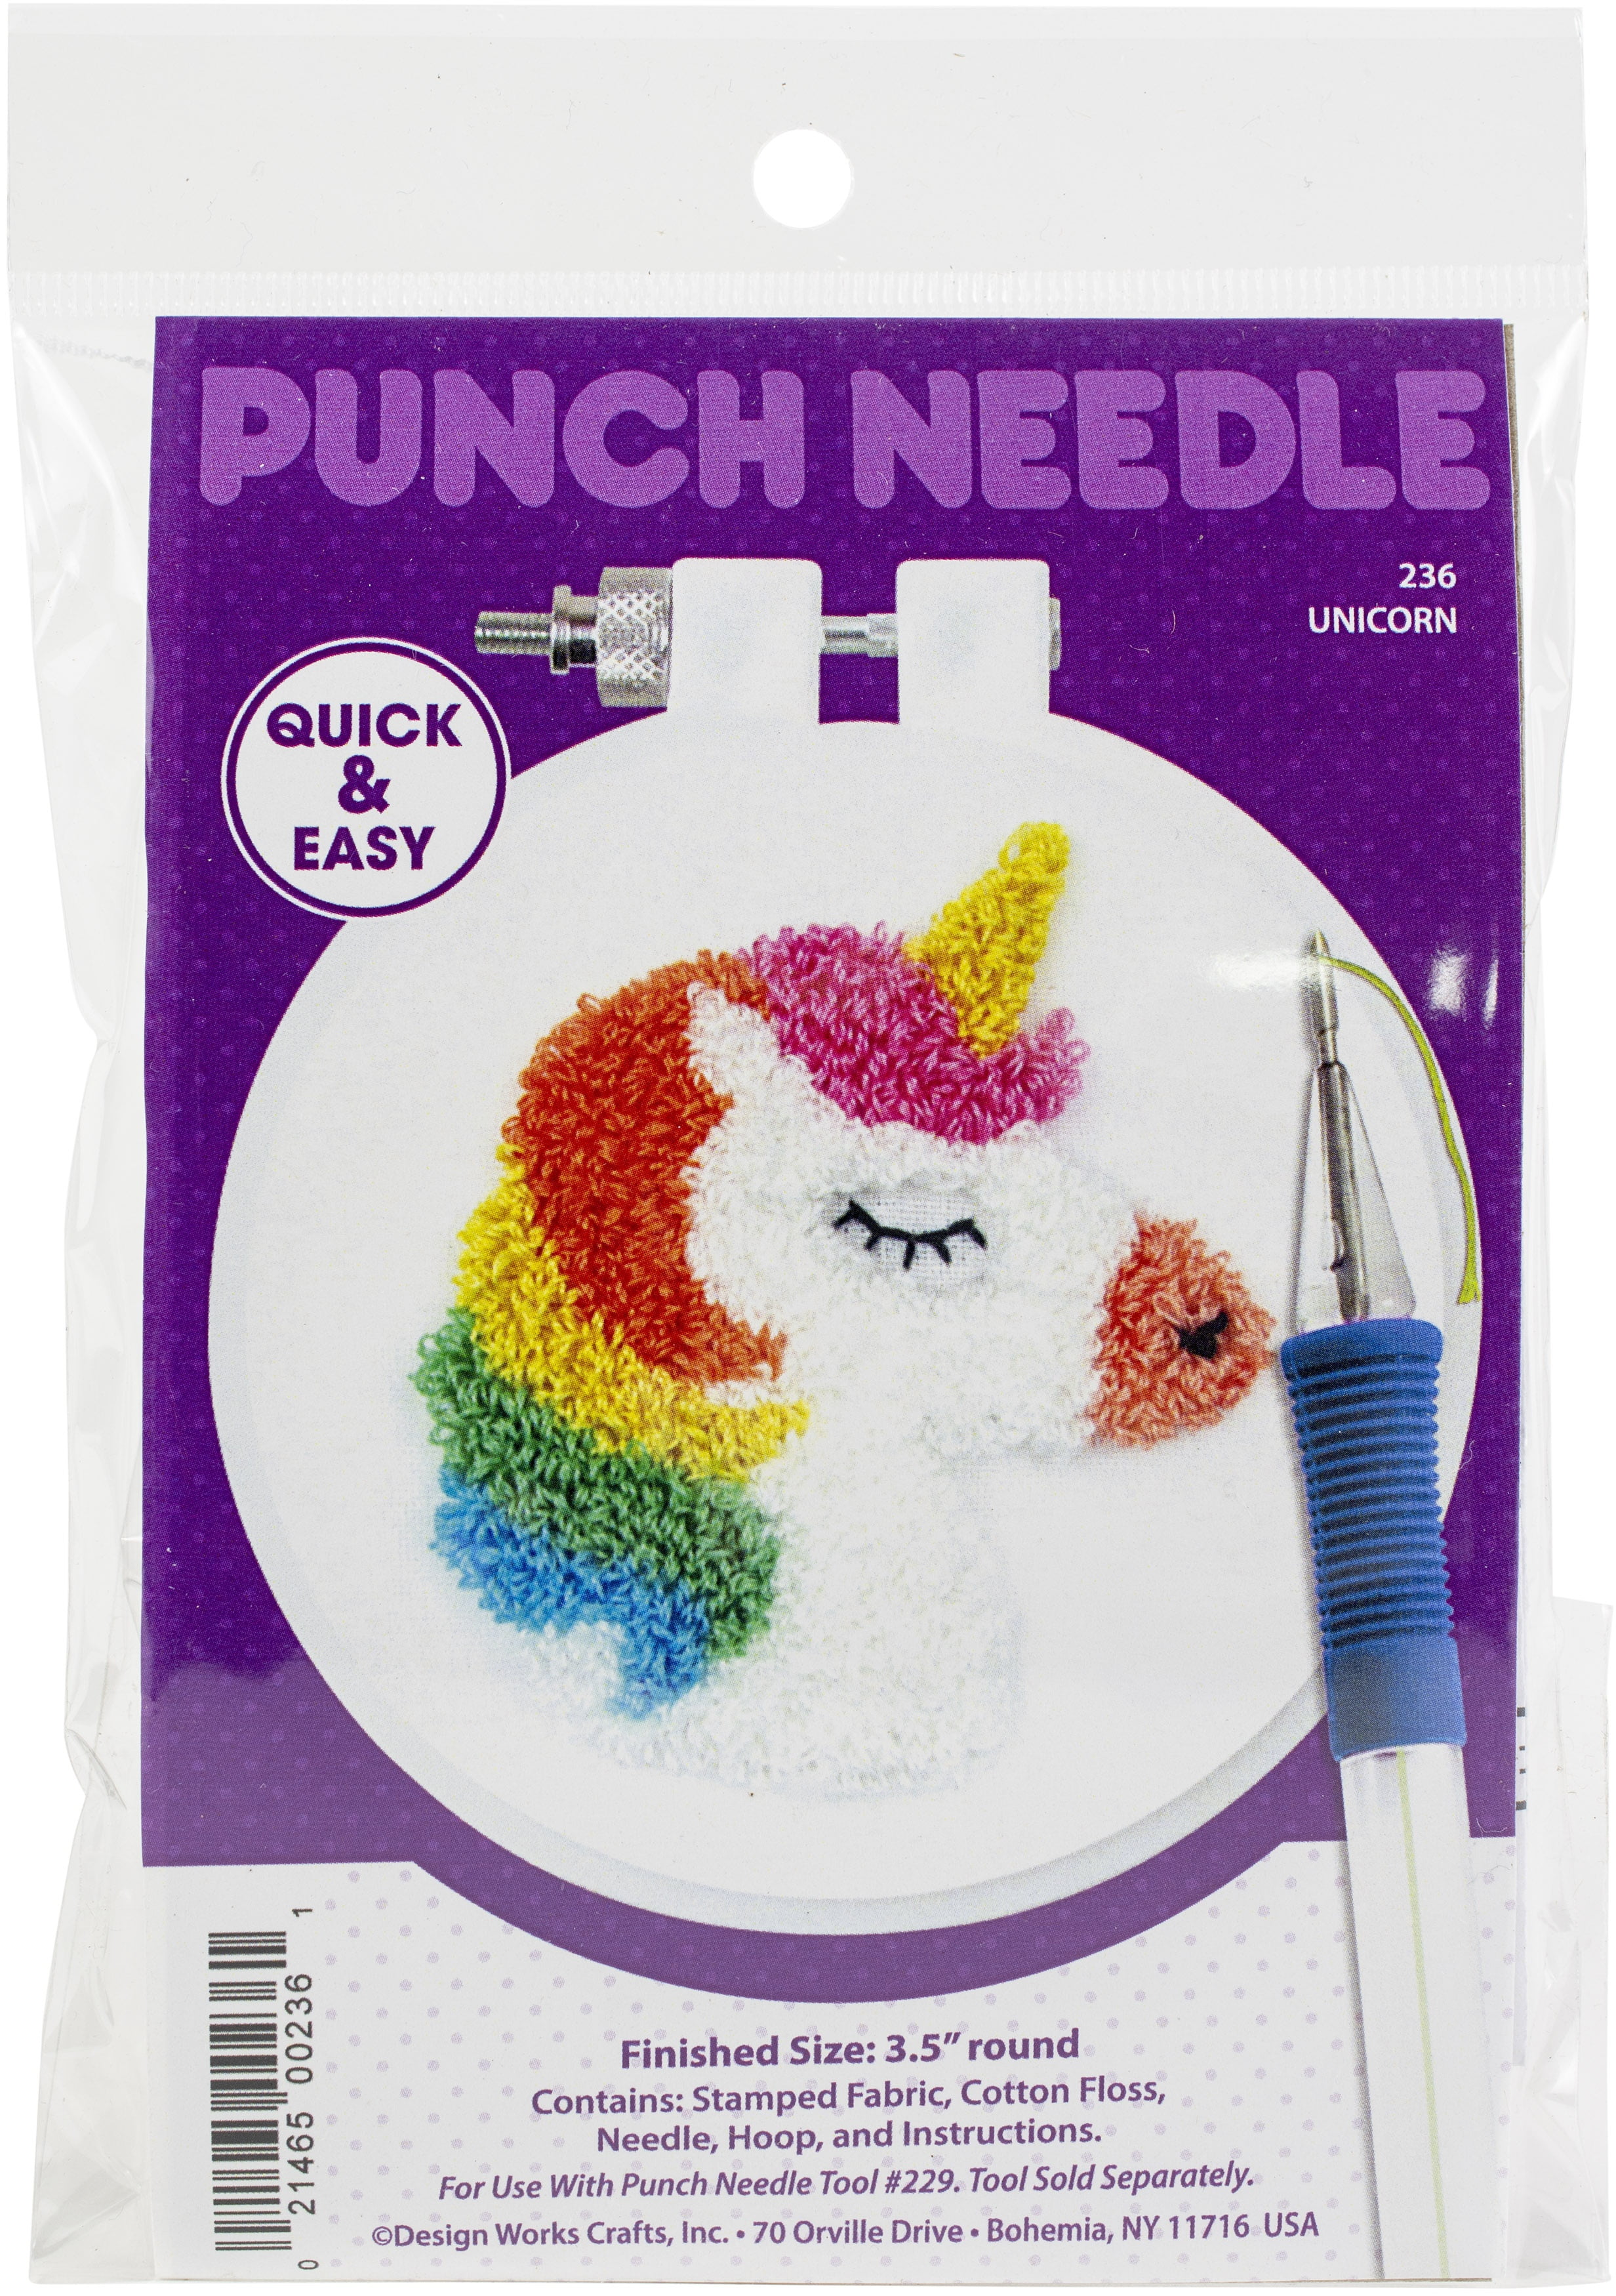 Embroidery String Kits,Cross Stitch Tools Kit,Punch Needle Embroidery  Kit,Perfect for Making Friendship Bracelet Strings,Includes 108 Colors  Thread